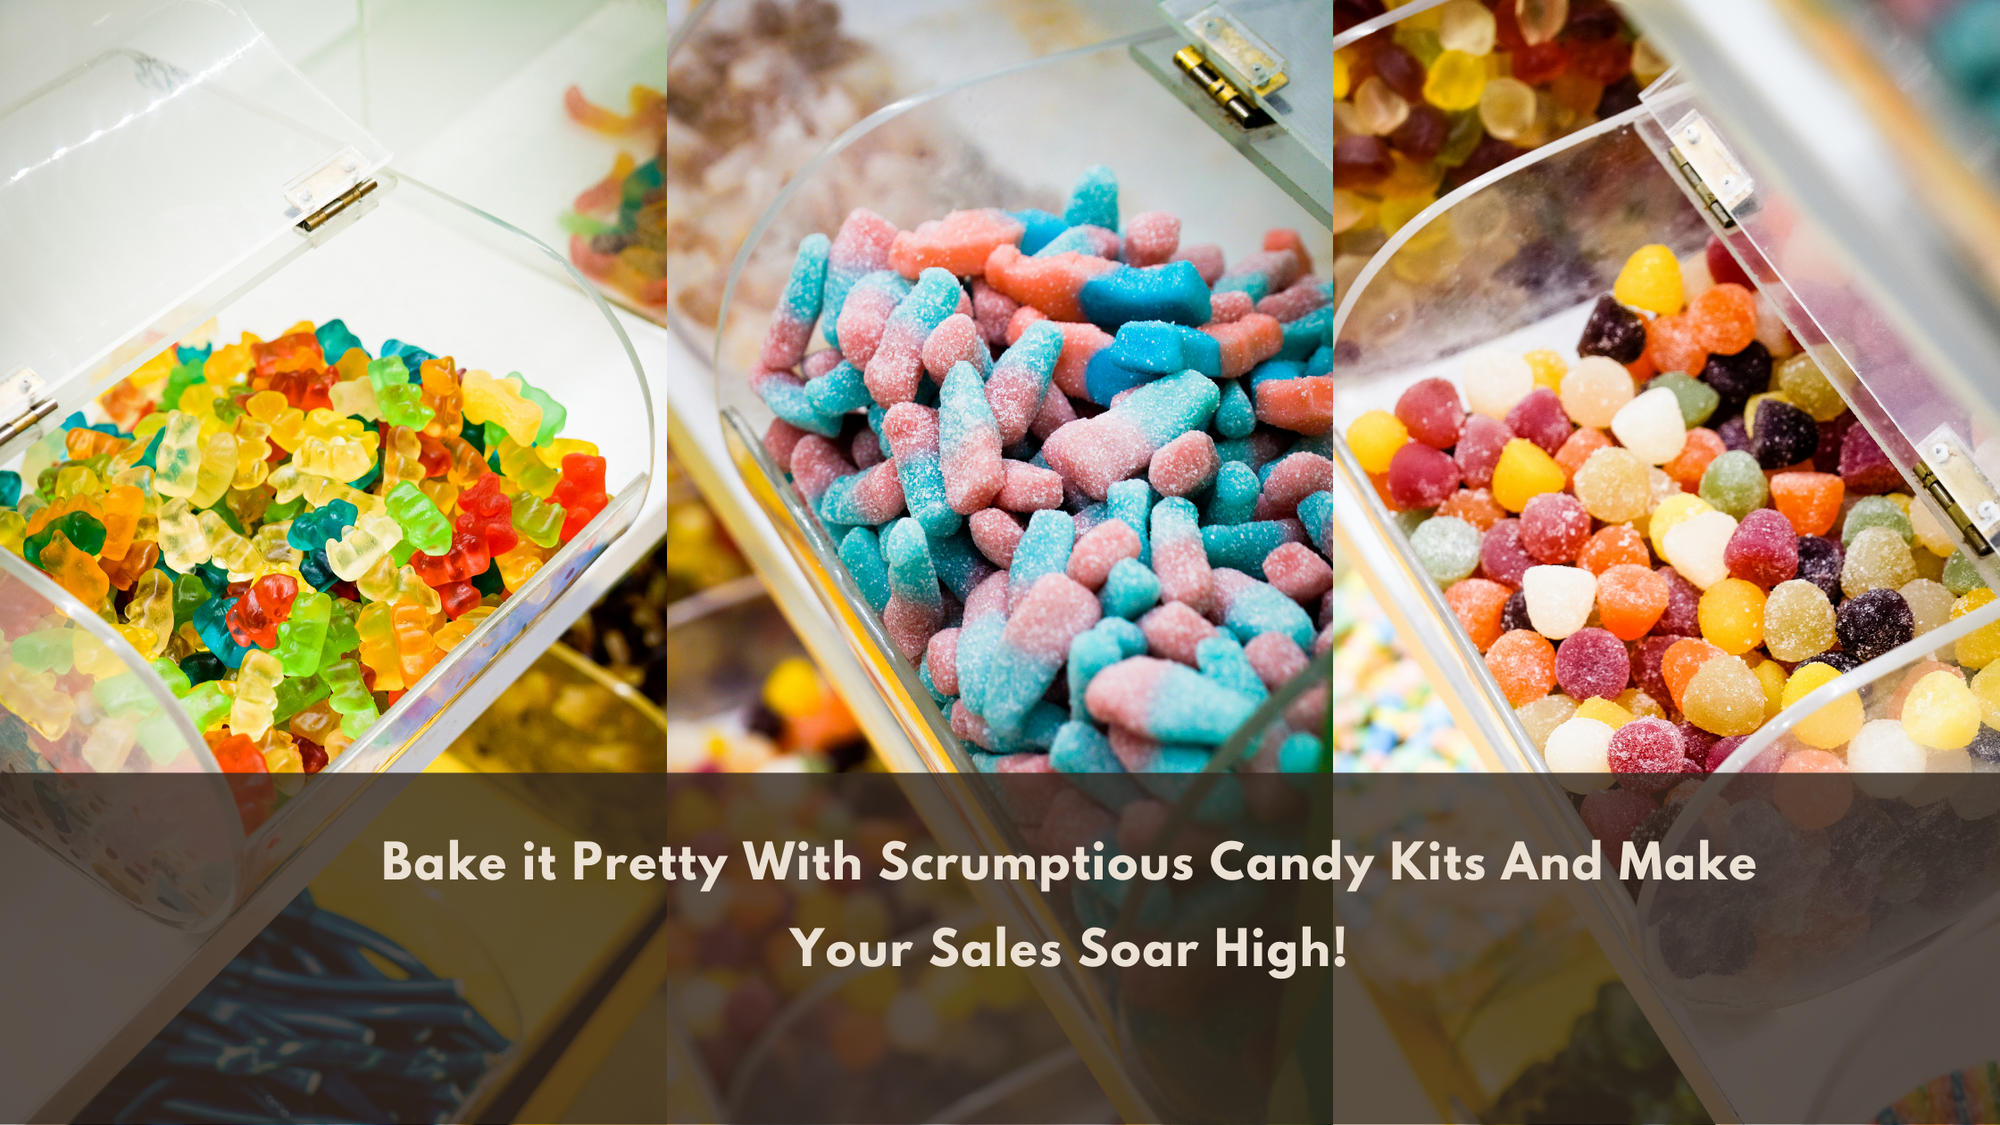 Bake it Pretty With Scrumptious Candy Kits And Make Your Sales Soar High!